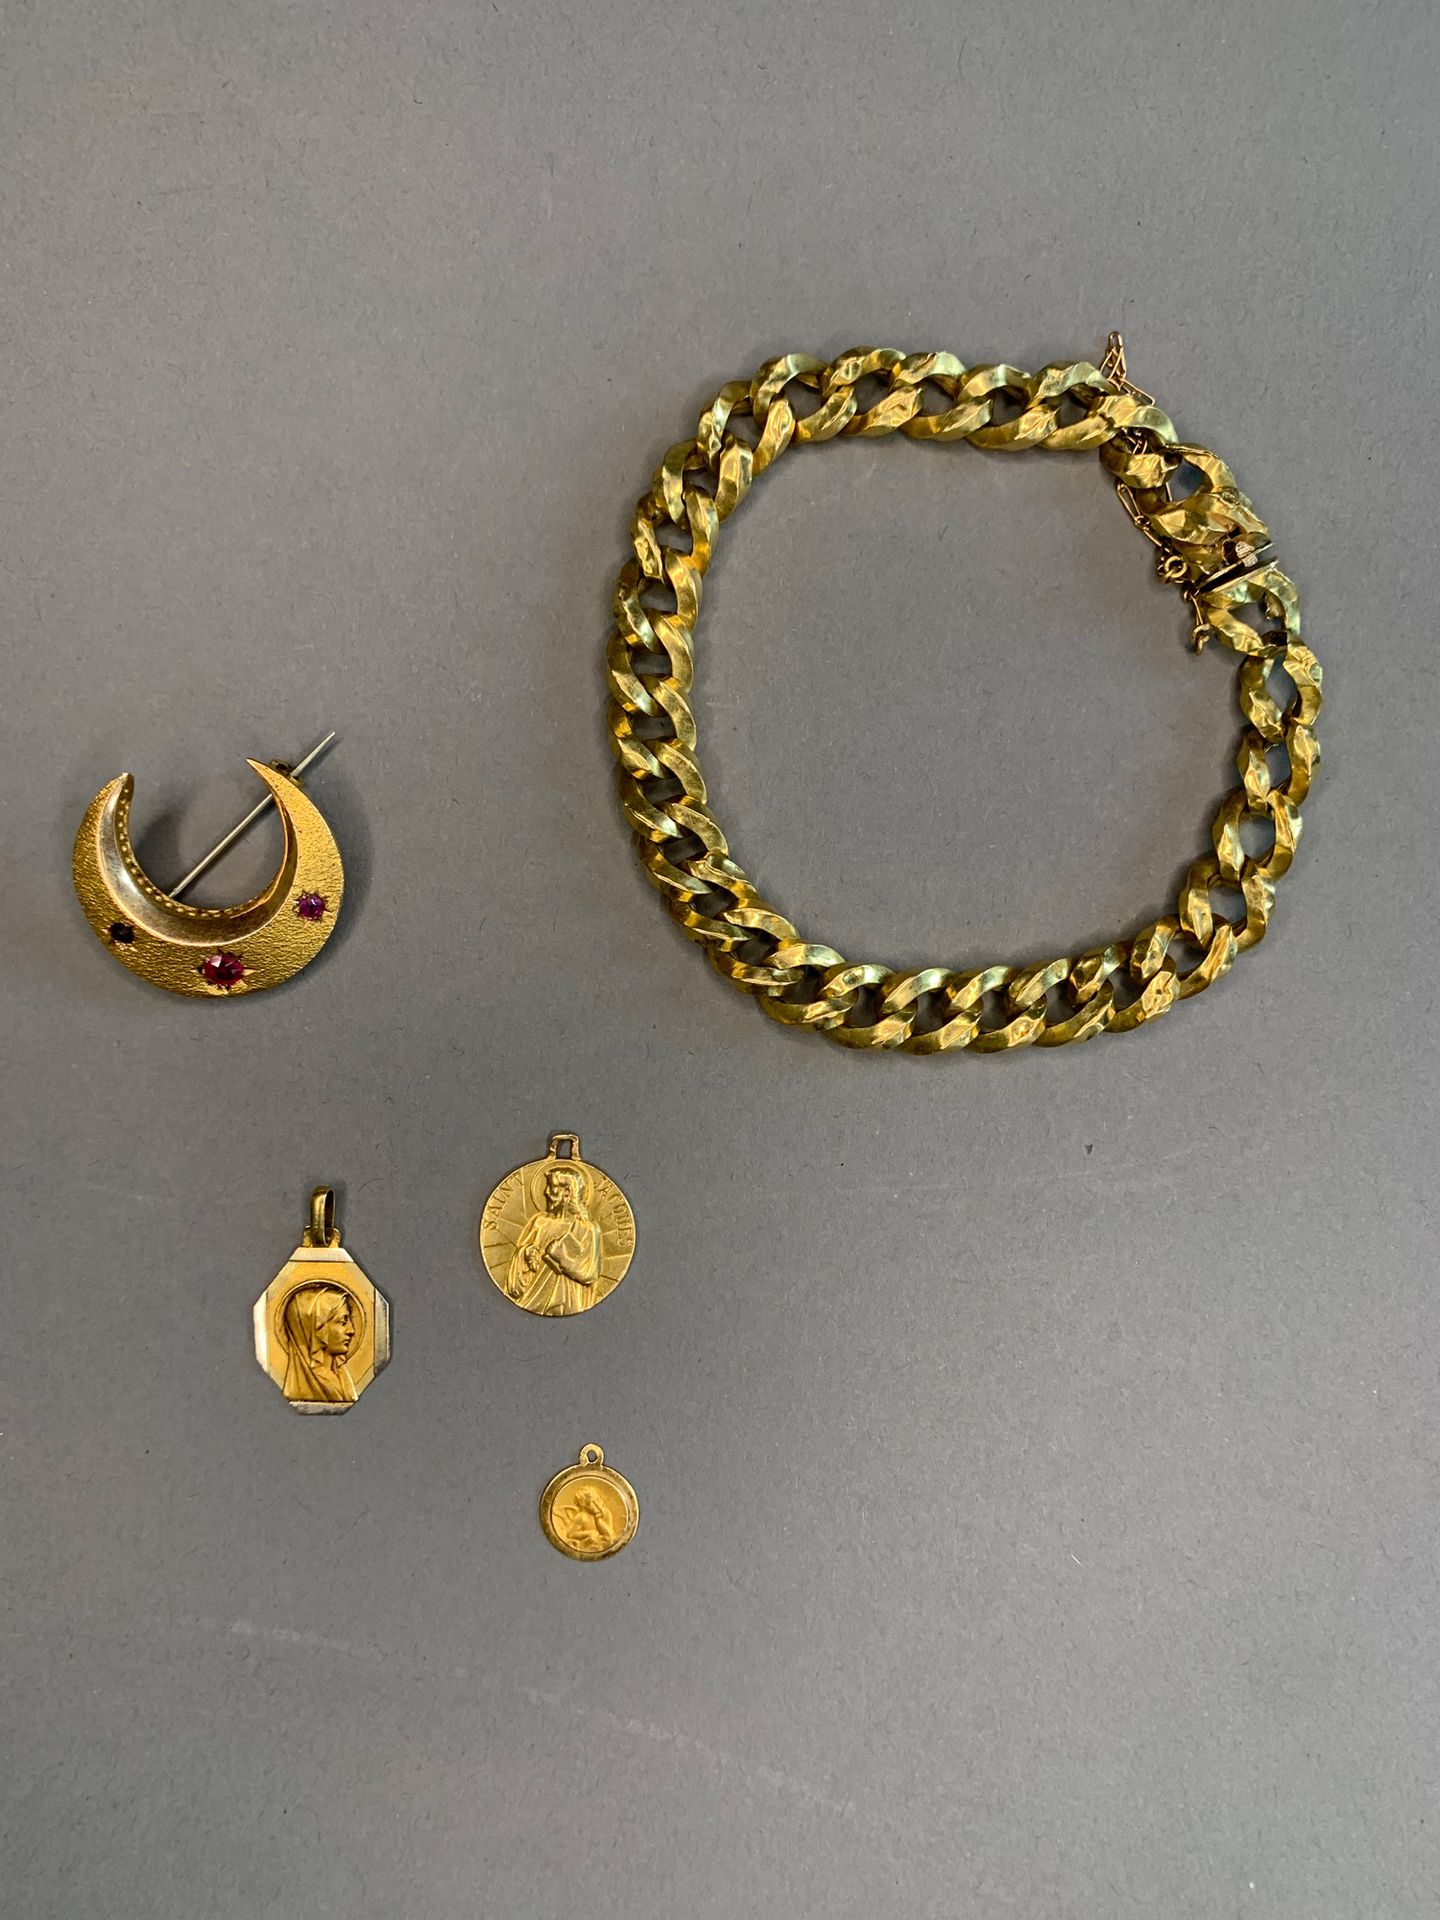 Null Lot in yellow gold.
It includes: a hollow gourmet bracelet, a moon brooch, &hellip;